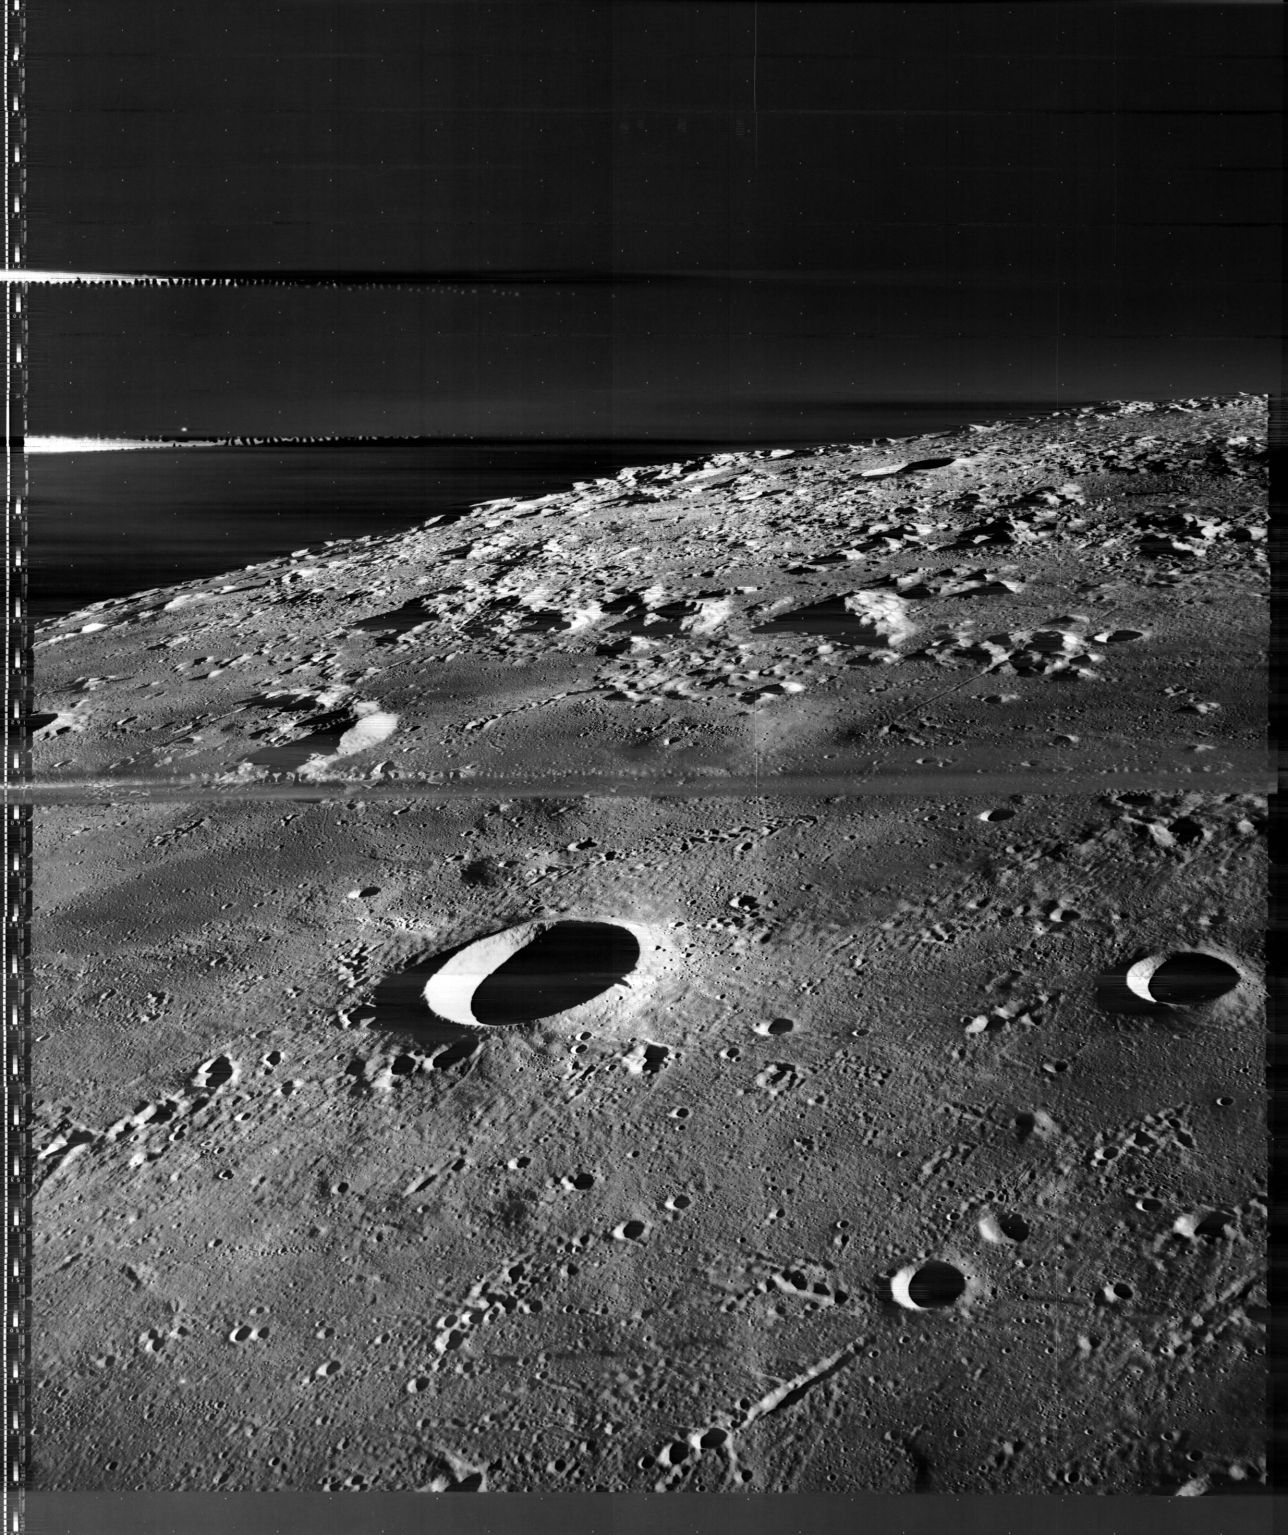 Image of the Moon's surface taken by Lunar Orbiter 3